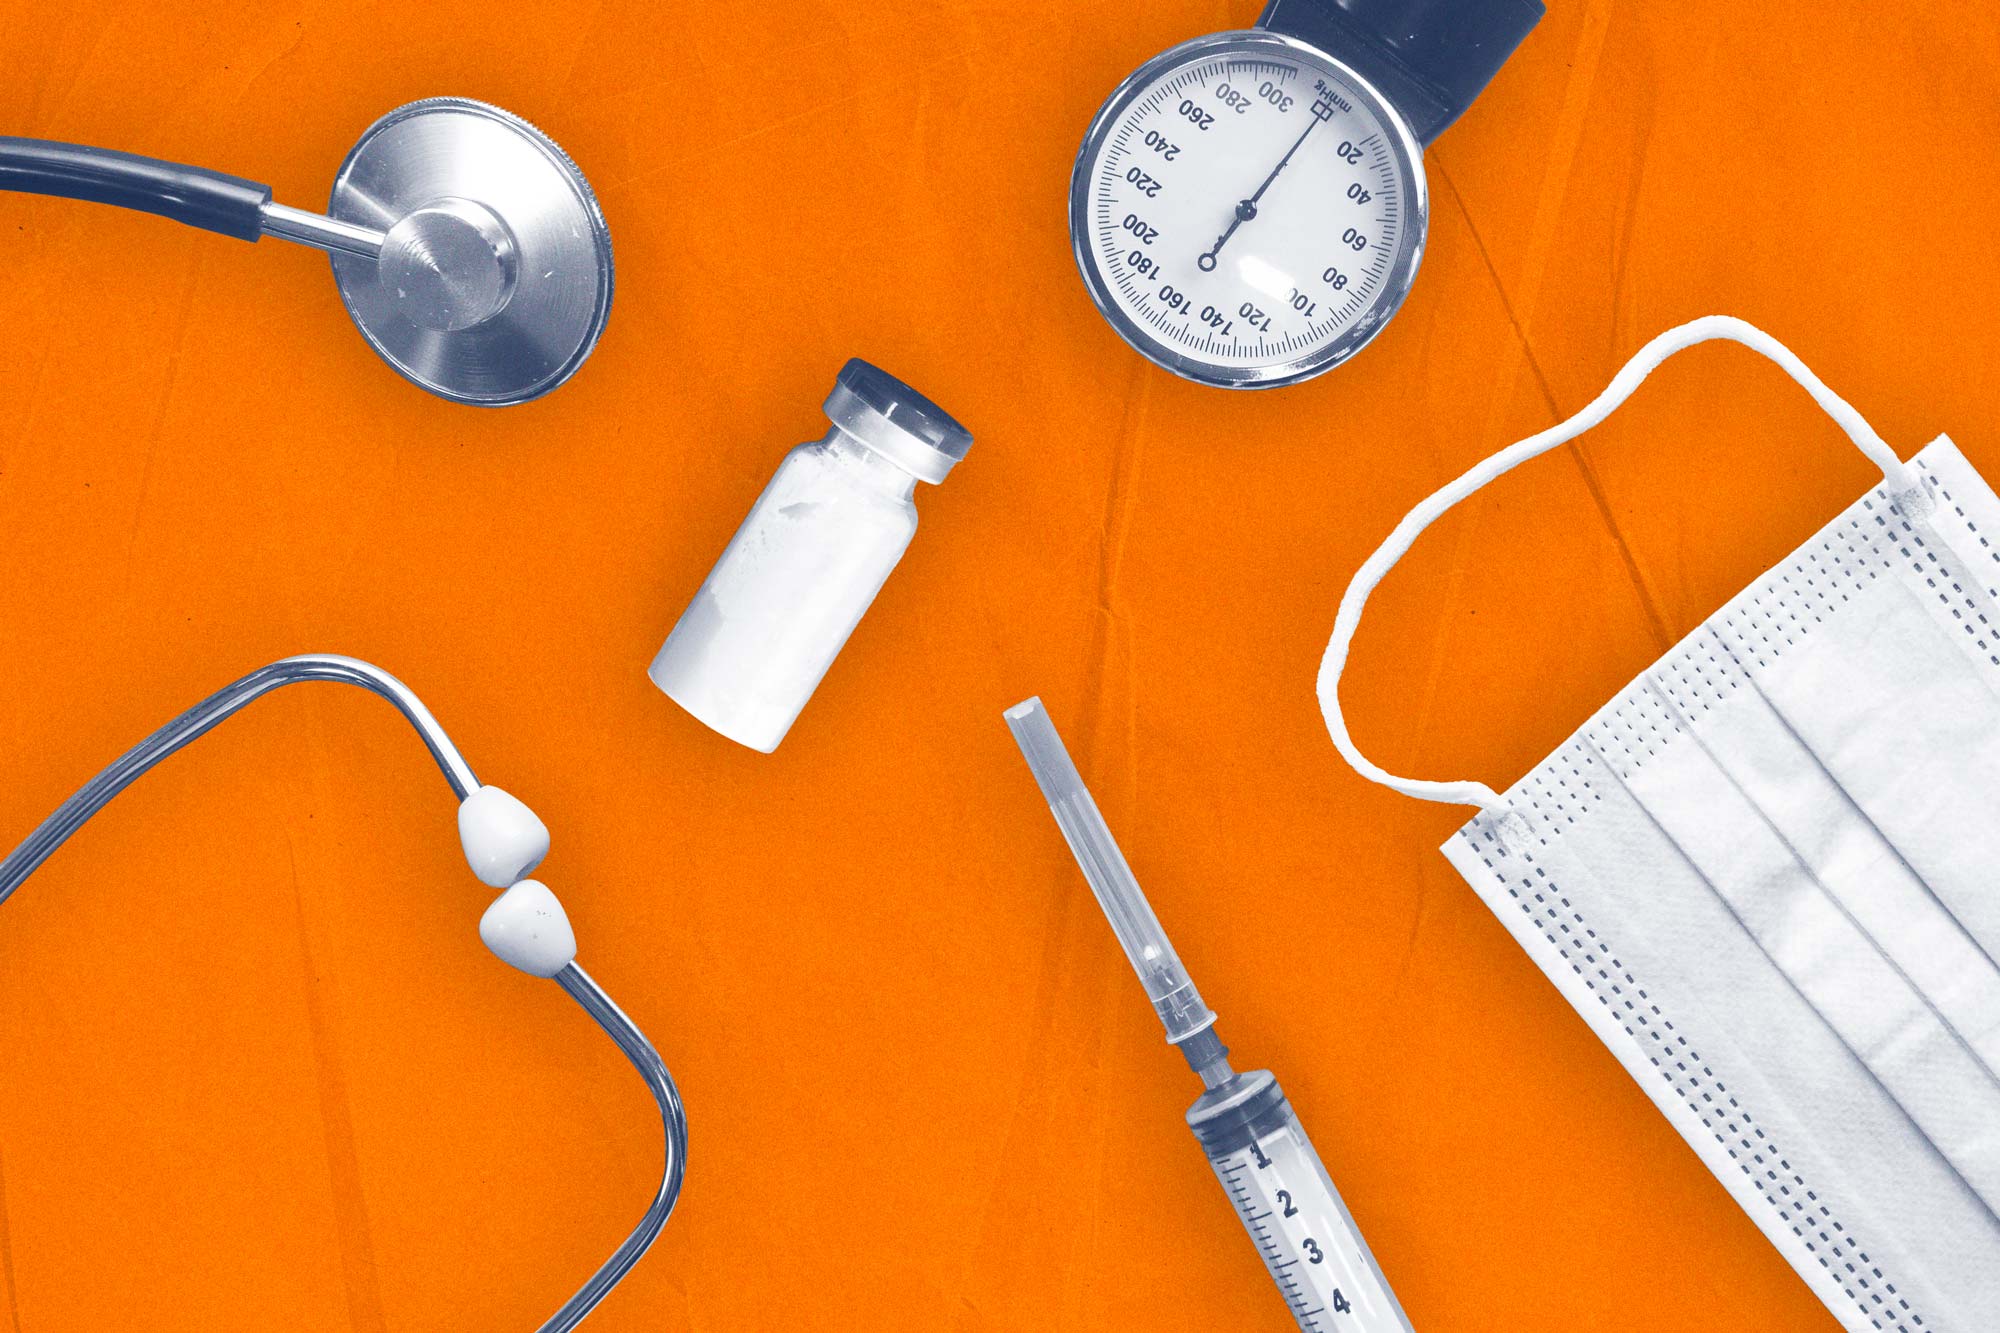 Stethoscope, medicine bottle, administering needle blood pressure meter and face mask on an orange background